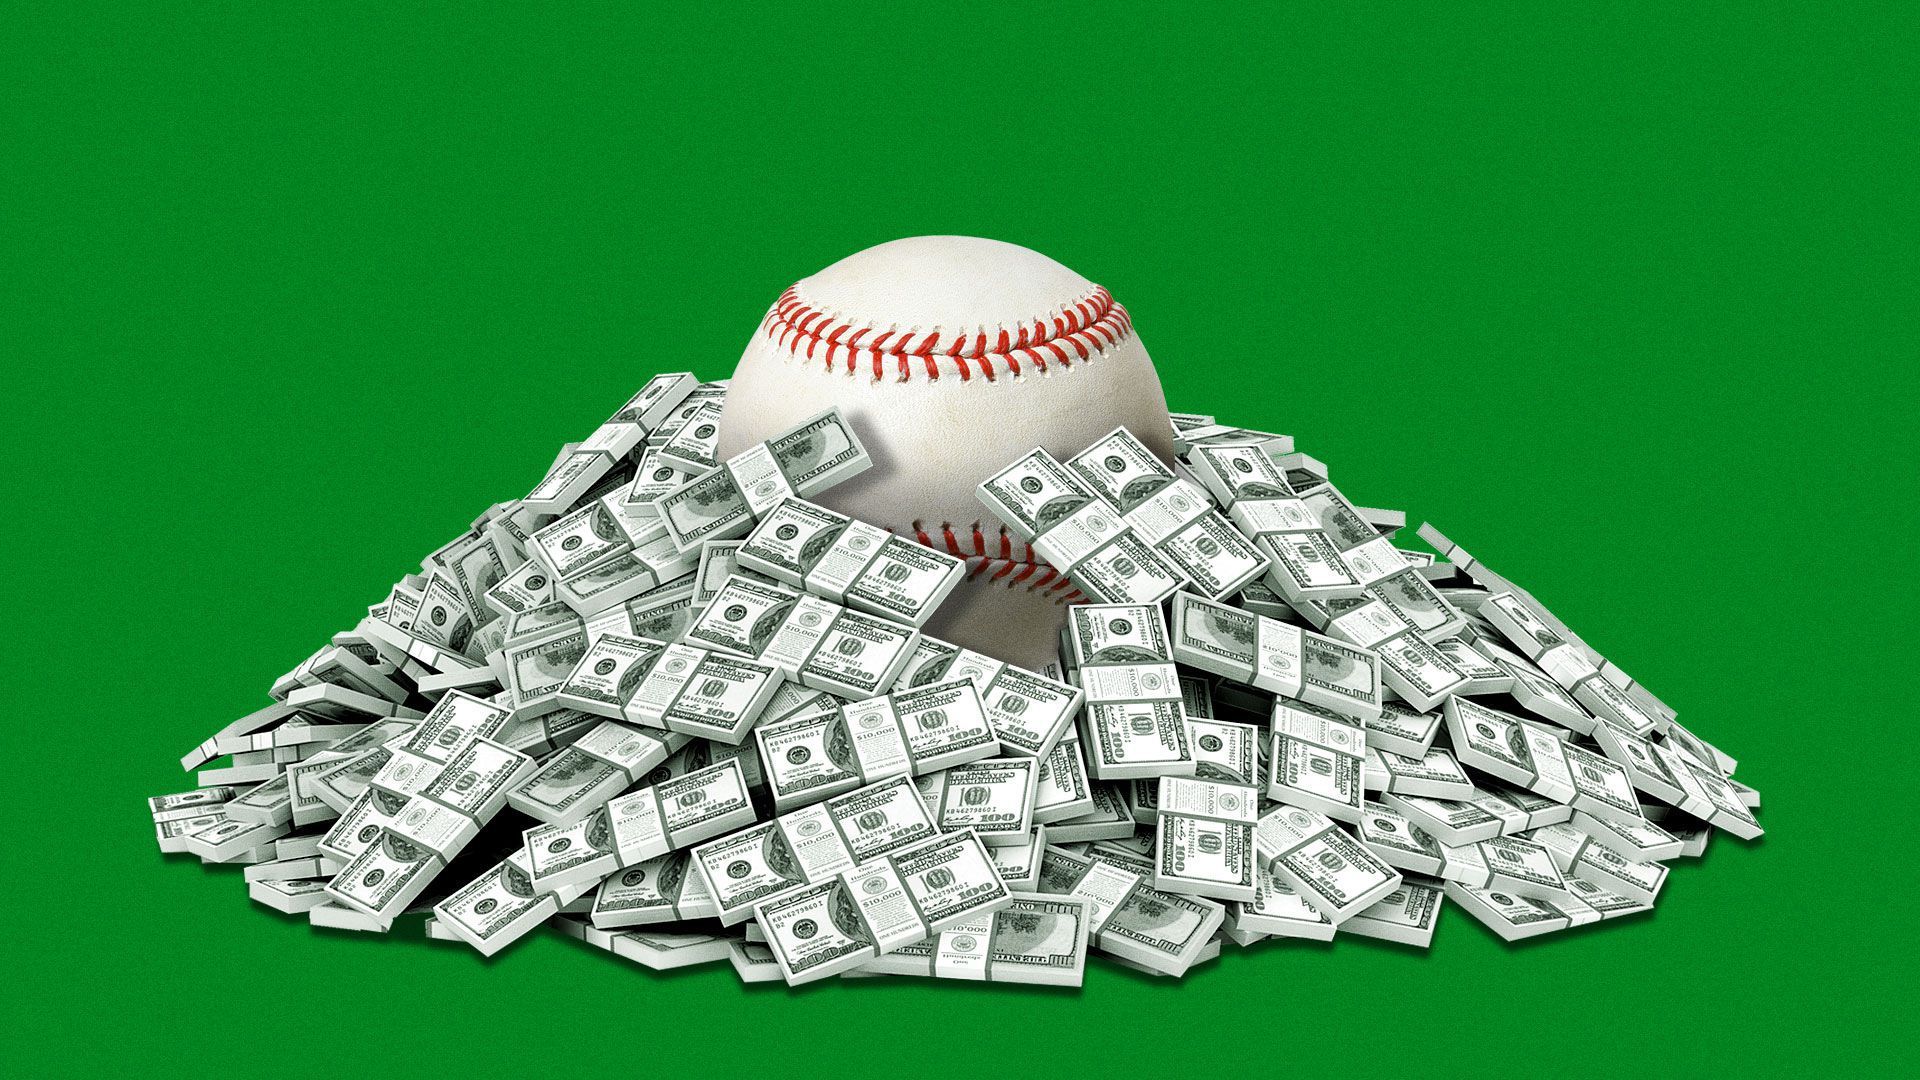 Illustration of a giant baseball surrounded by a pile of money